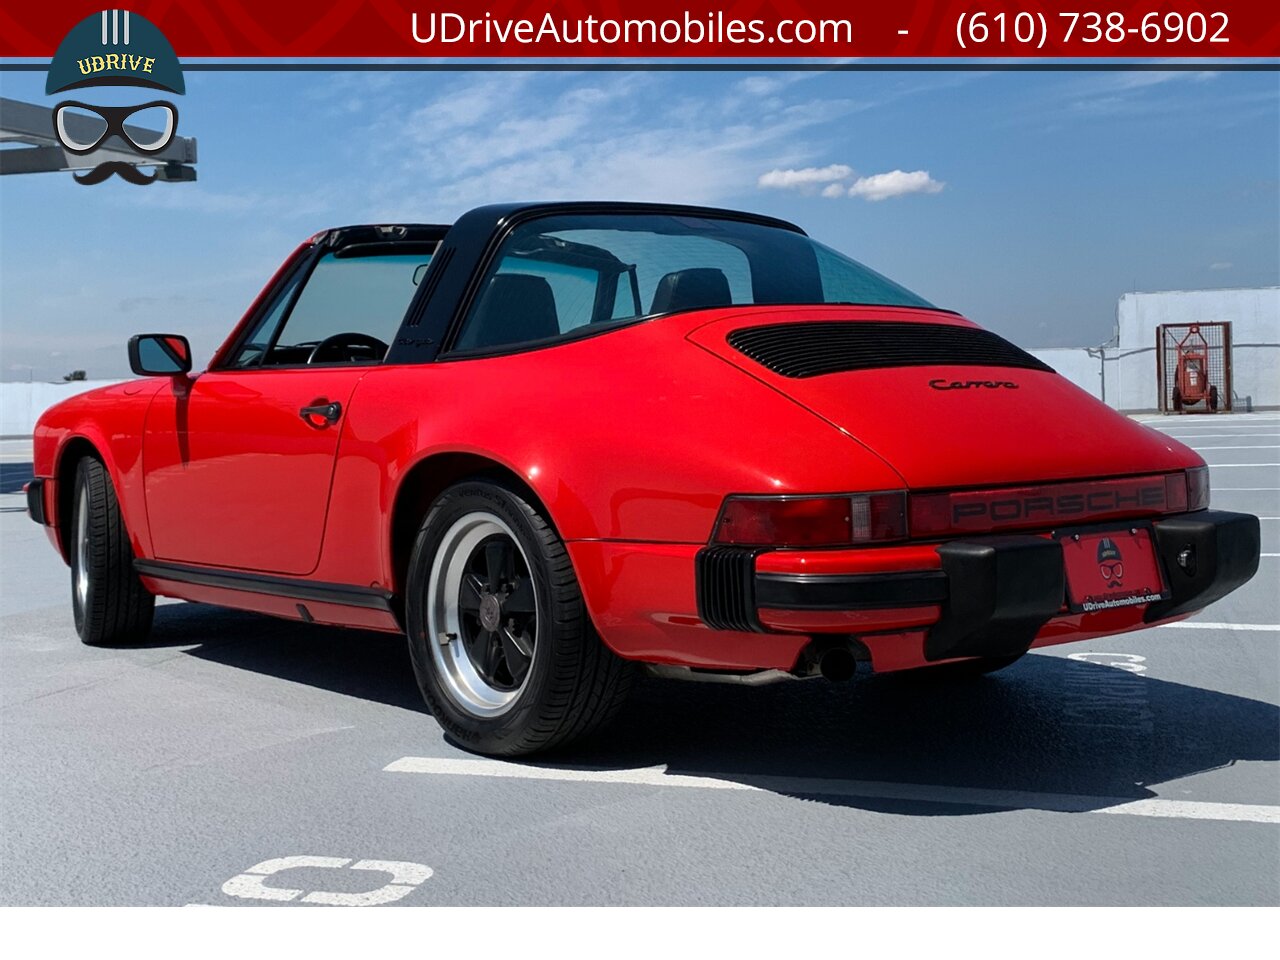 1986 Porsche 911 Carrera Targa 39k Miles Same Owner Since 1988  $23k in Service History Since 2011 - Photo 6 - West Chester, PA 19382